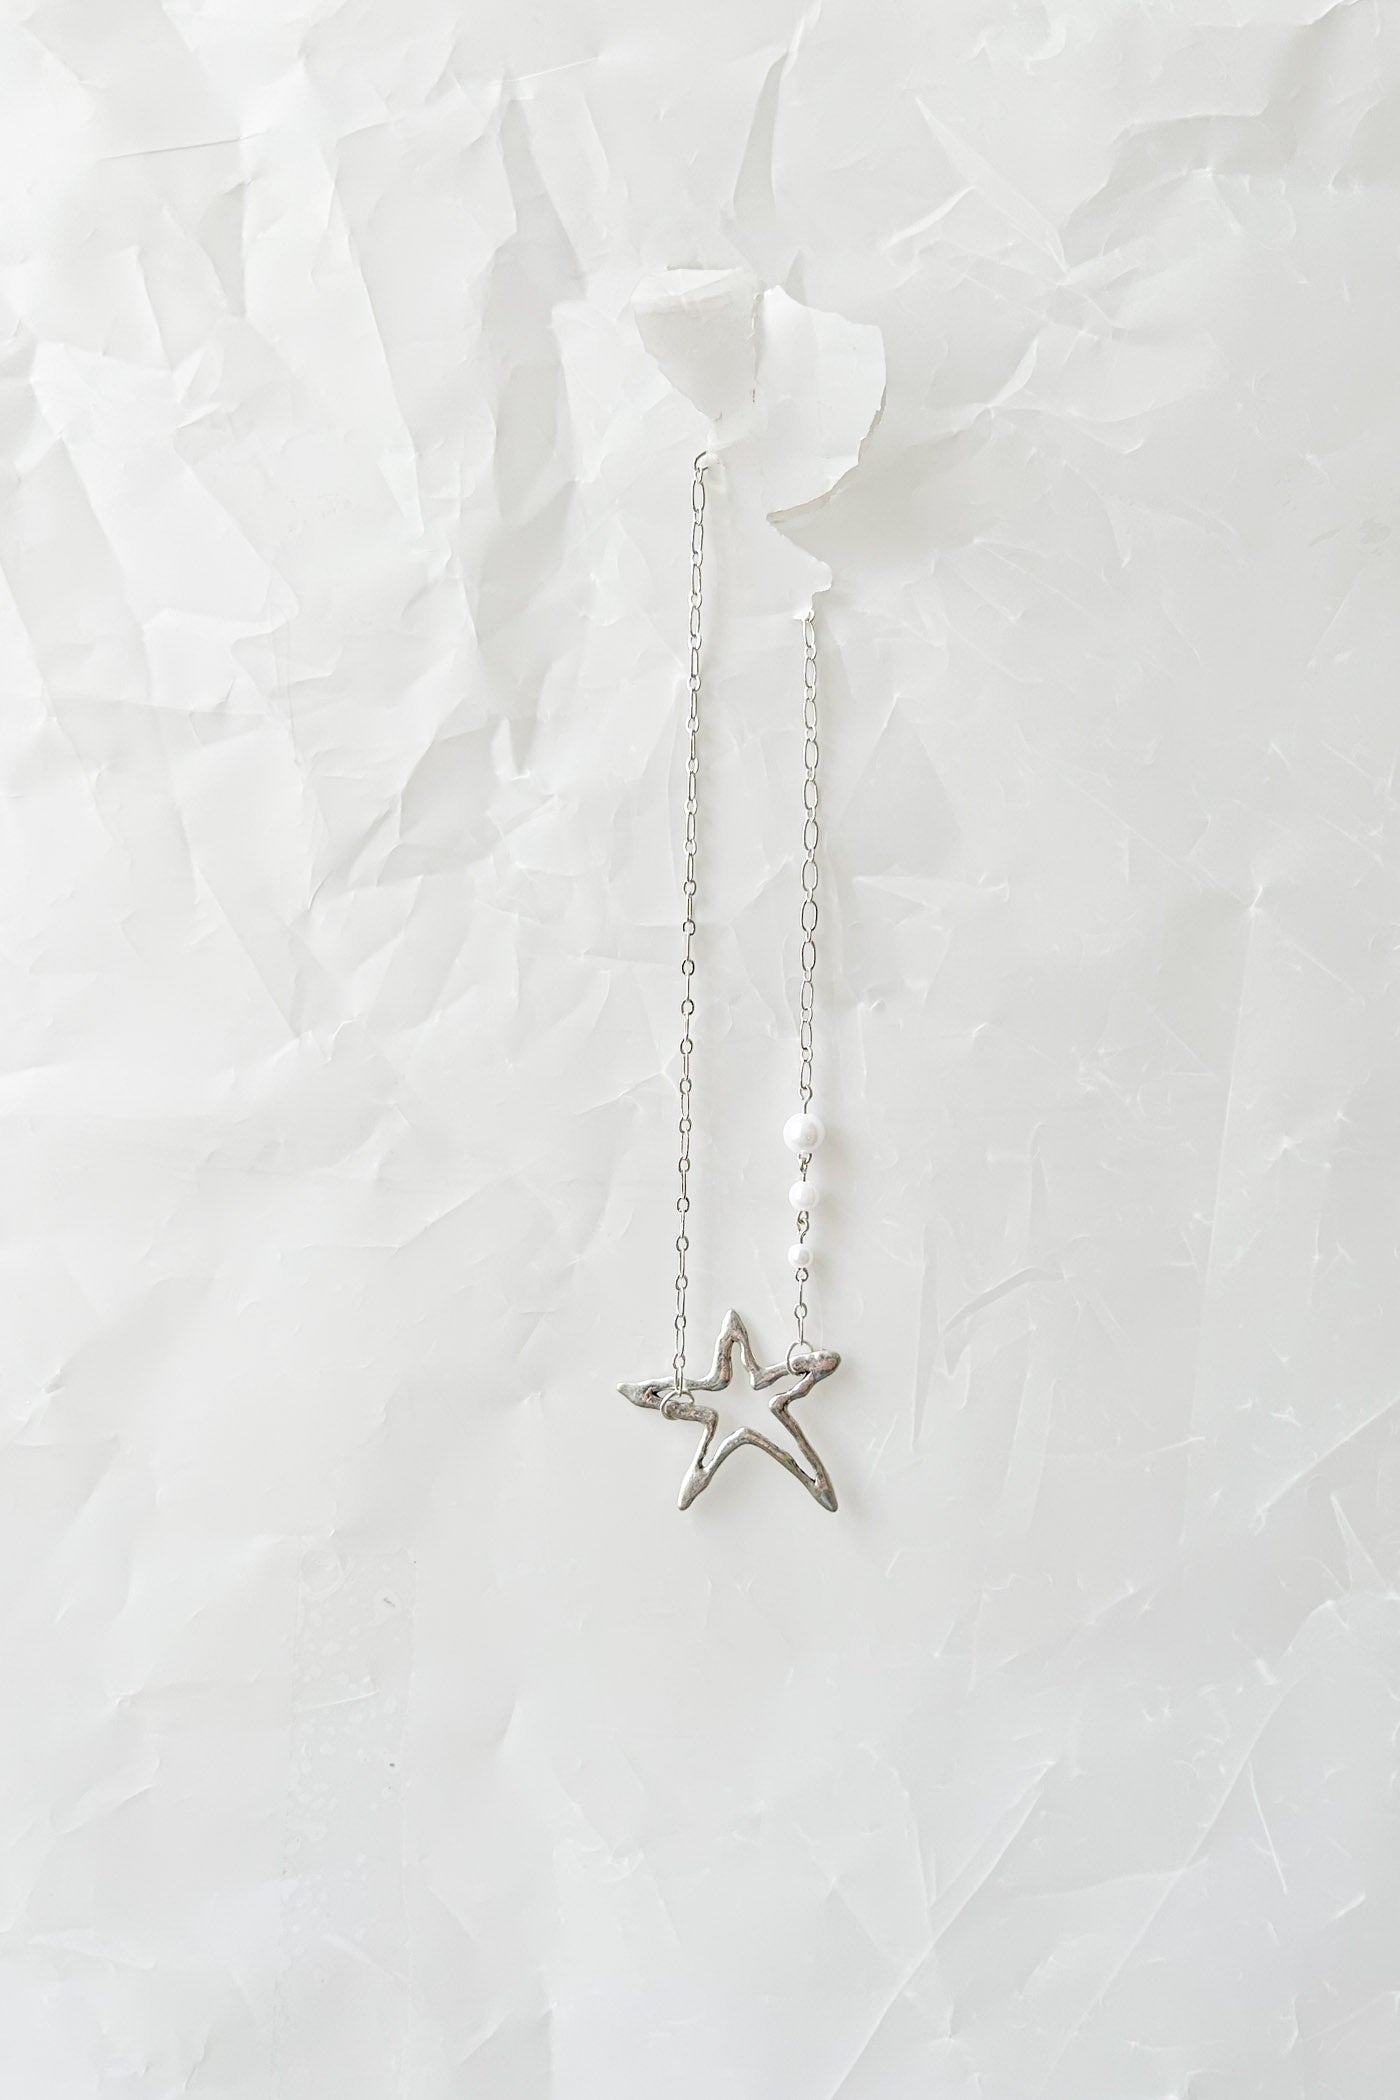 Flowergardin Star and Pearl Beaded Necklace